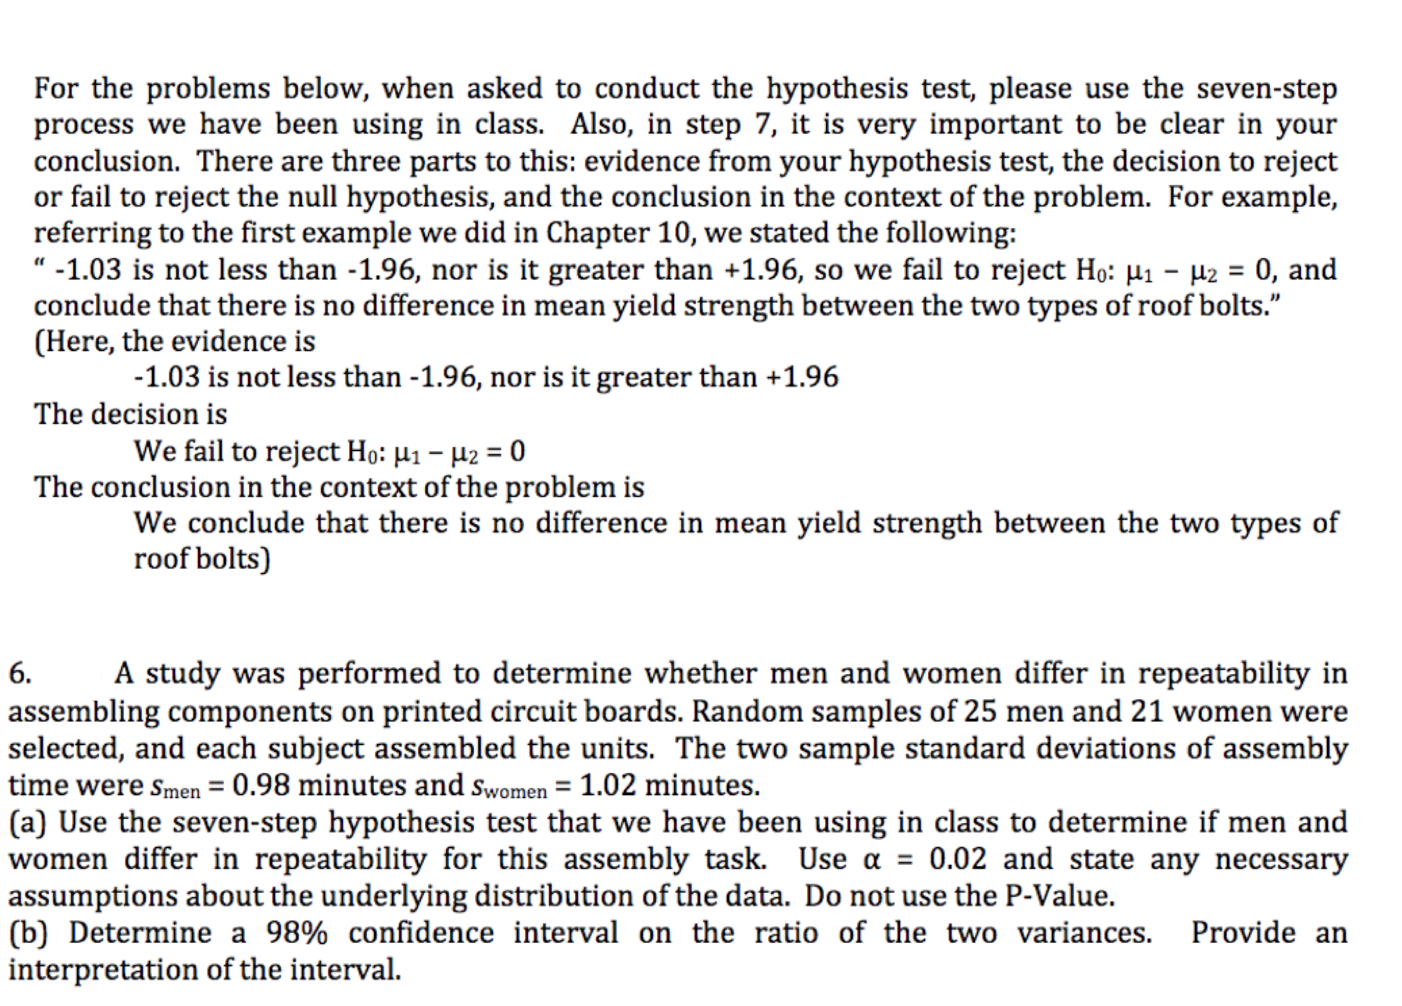 For the problems below, when asked to conduct the hypothesis test, please use the seven-step
process we have been using in class. Also, in step 7, it is very important to be clear in your
conclusion. There are three parts to this: evidence from your hypothesis test, the decision to reject
or fail to reject the null hypothesis, and the conclusion in the context of the problem. For example,
referring to the first example we did in Chapter 10, we stated the following
"-1.03 is not less than -1.96, nor is it greater than +1.96, so we fail to reject Ho: Hi - 2 0, and
conclude that there is no difference in mean yield strength between the two types of roof bolts."
(Here, the evidence is
-1.03 is not less than -1.96, nor is it greater than +1.96
The decision is
We fail to reject Ho: H1-2 = 0
The conclusion in the context of the problem is
We conclude that there is no difference in mean yield strength between the two types of
roof bolts)
A study was performed to determine whether men and women differ in repeatability in
6.
assembling components on printed circuit boards. Random samples of 25 men and 21 women were
selected, and each subject assembled the units. The two sample standard deviations of assembly
time were smen = 0.98 minutes and swomen 1.02 minutes.
(a) Use the seven-step hypothesis test that we have been using in class to determine if men and
women differ in repeatability for this assembly task. Use a = 0.02 and state any necessary
assumptions about the underlying distribution of the data. Do not use the P-Value.
(b) Determine a 98% confidence interval on the ratio of the two variances.
interpretation of the interval
Provide an
